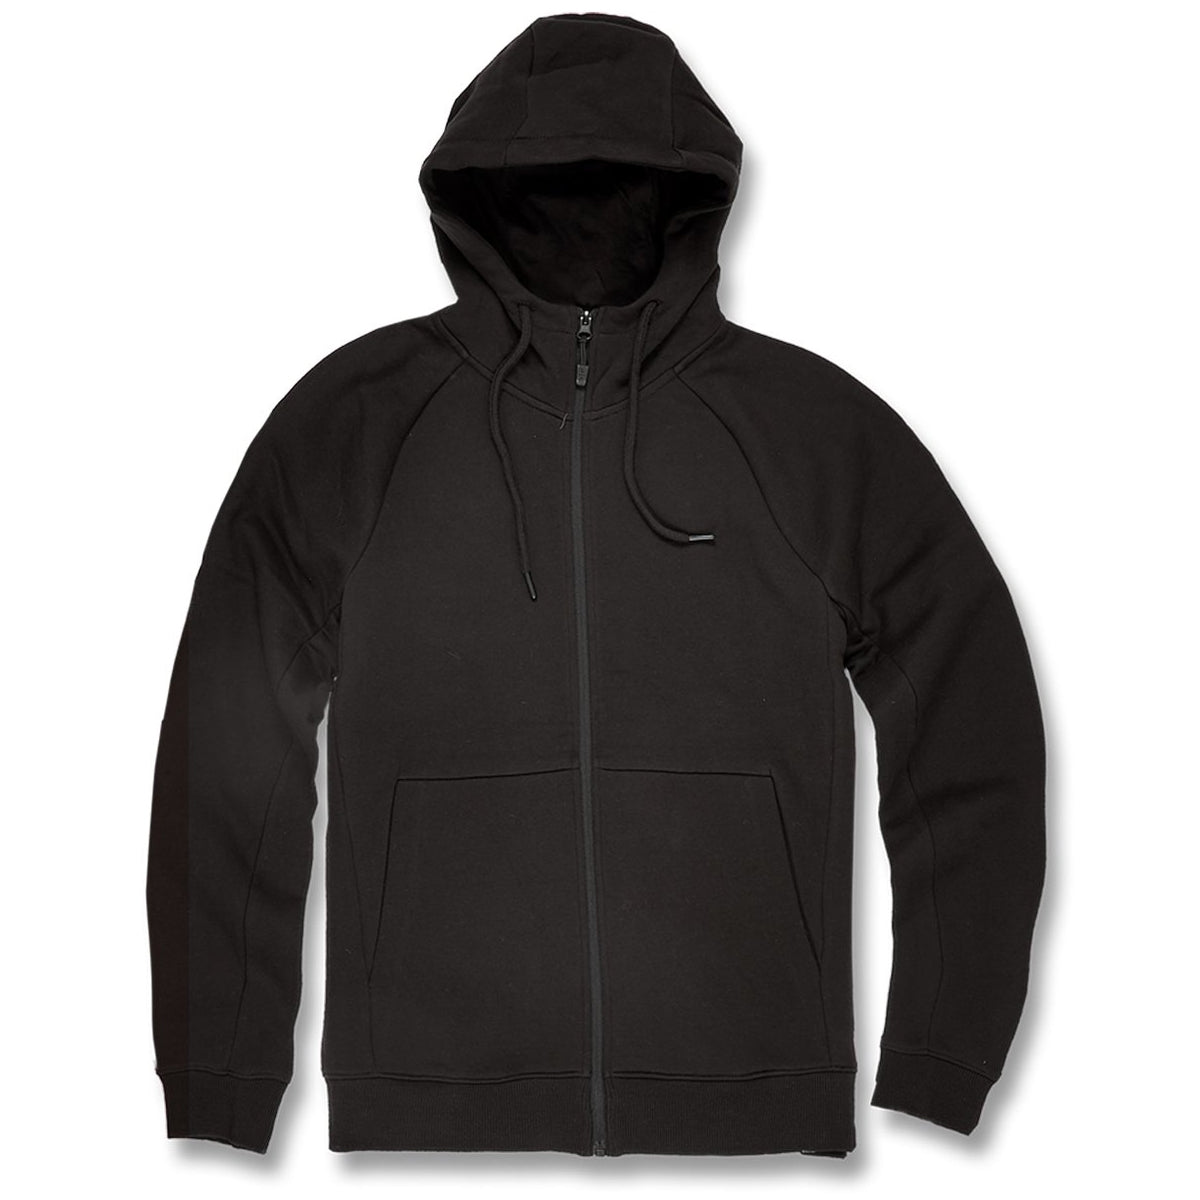 black hoodie with white strings and zipper